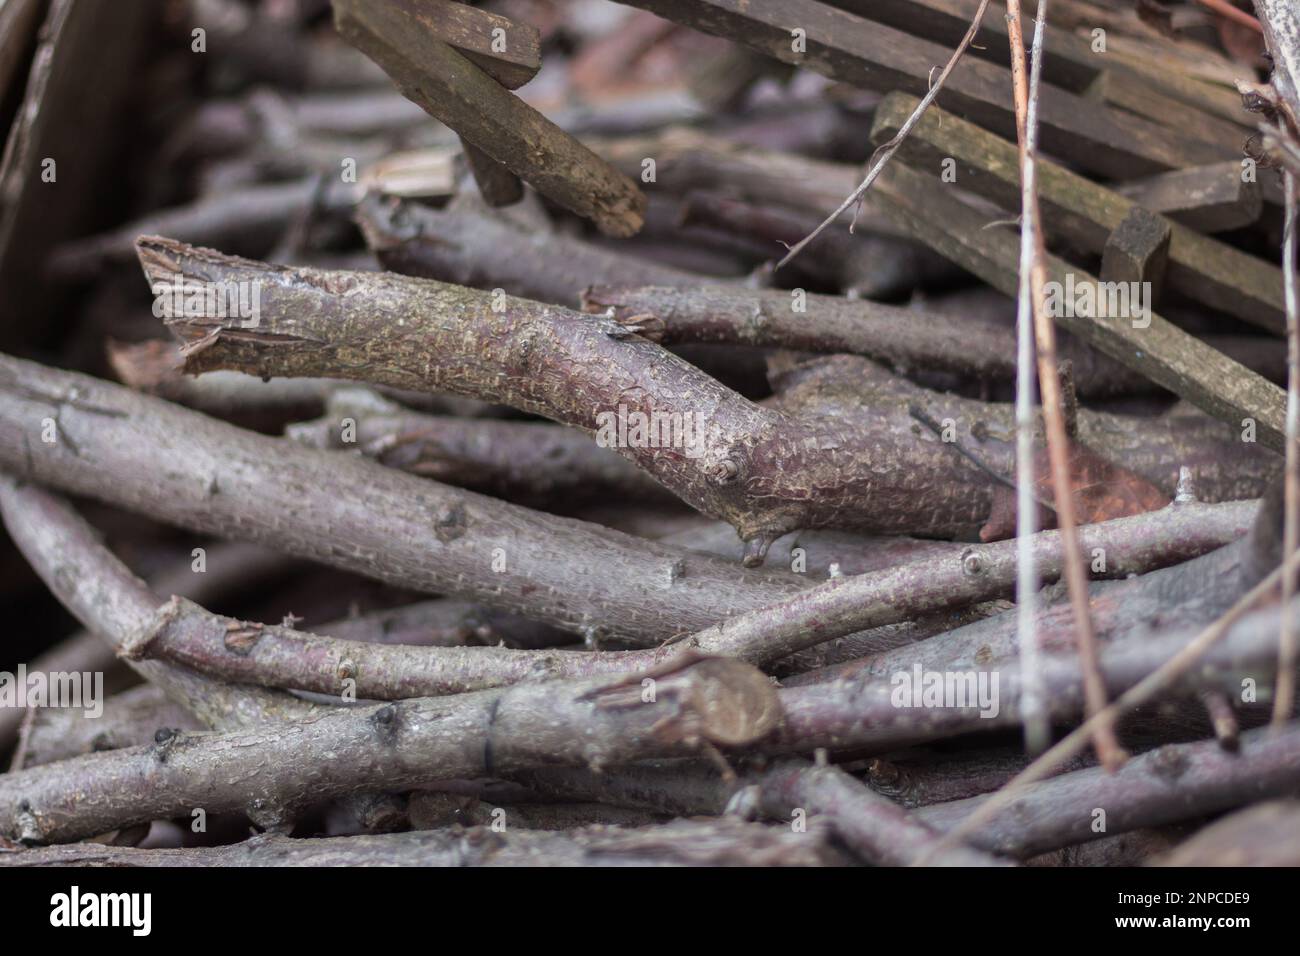 Firewood close up. Tree branches. Wooden sticks background. Bonfire concept. Bundle of sticks. Campfite concept. Twigs close up. Nature in details. Stock Photo